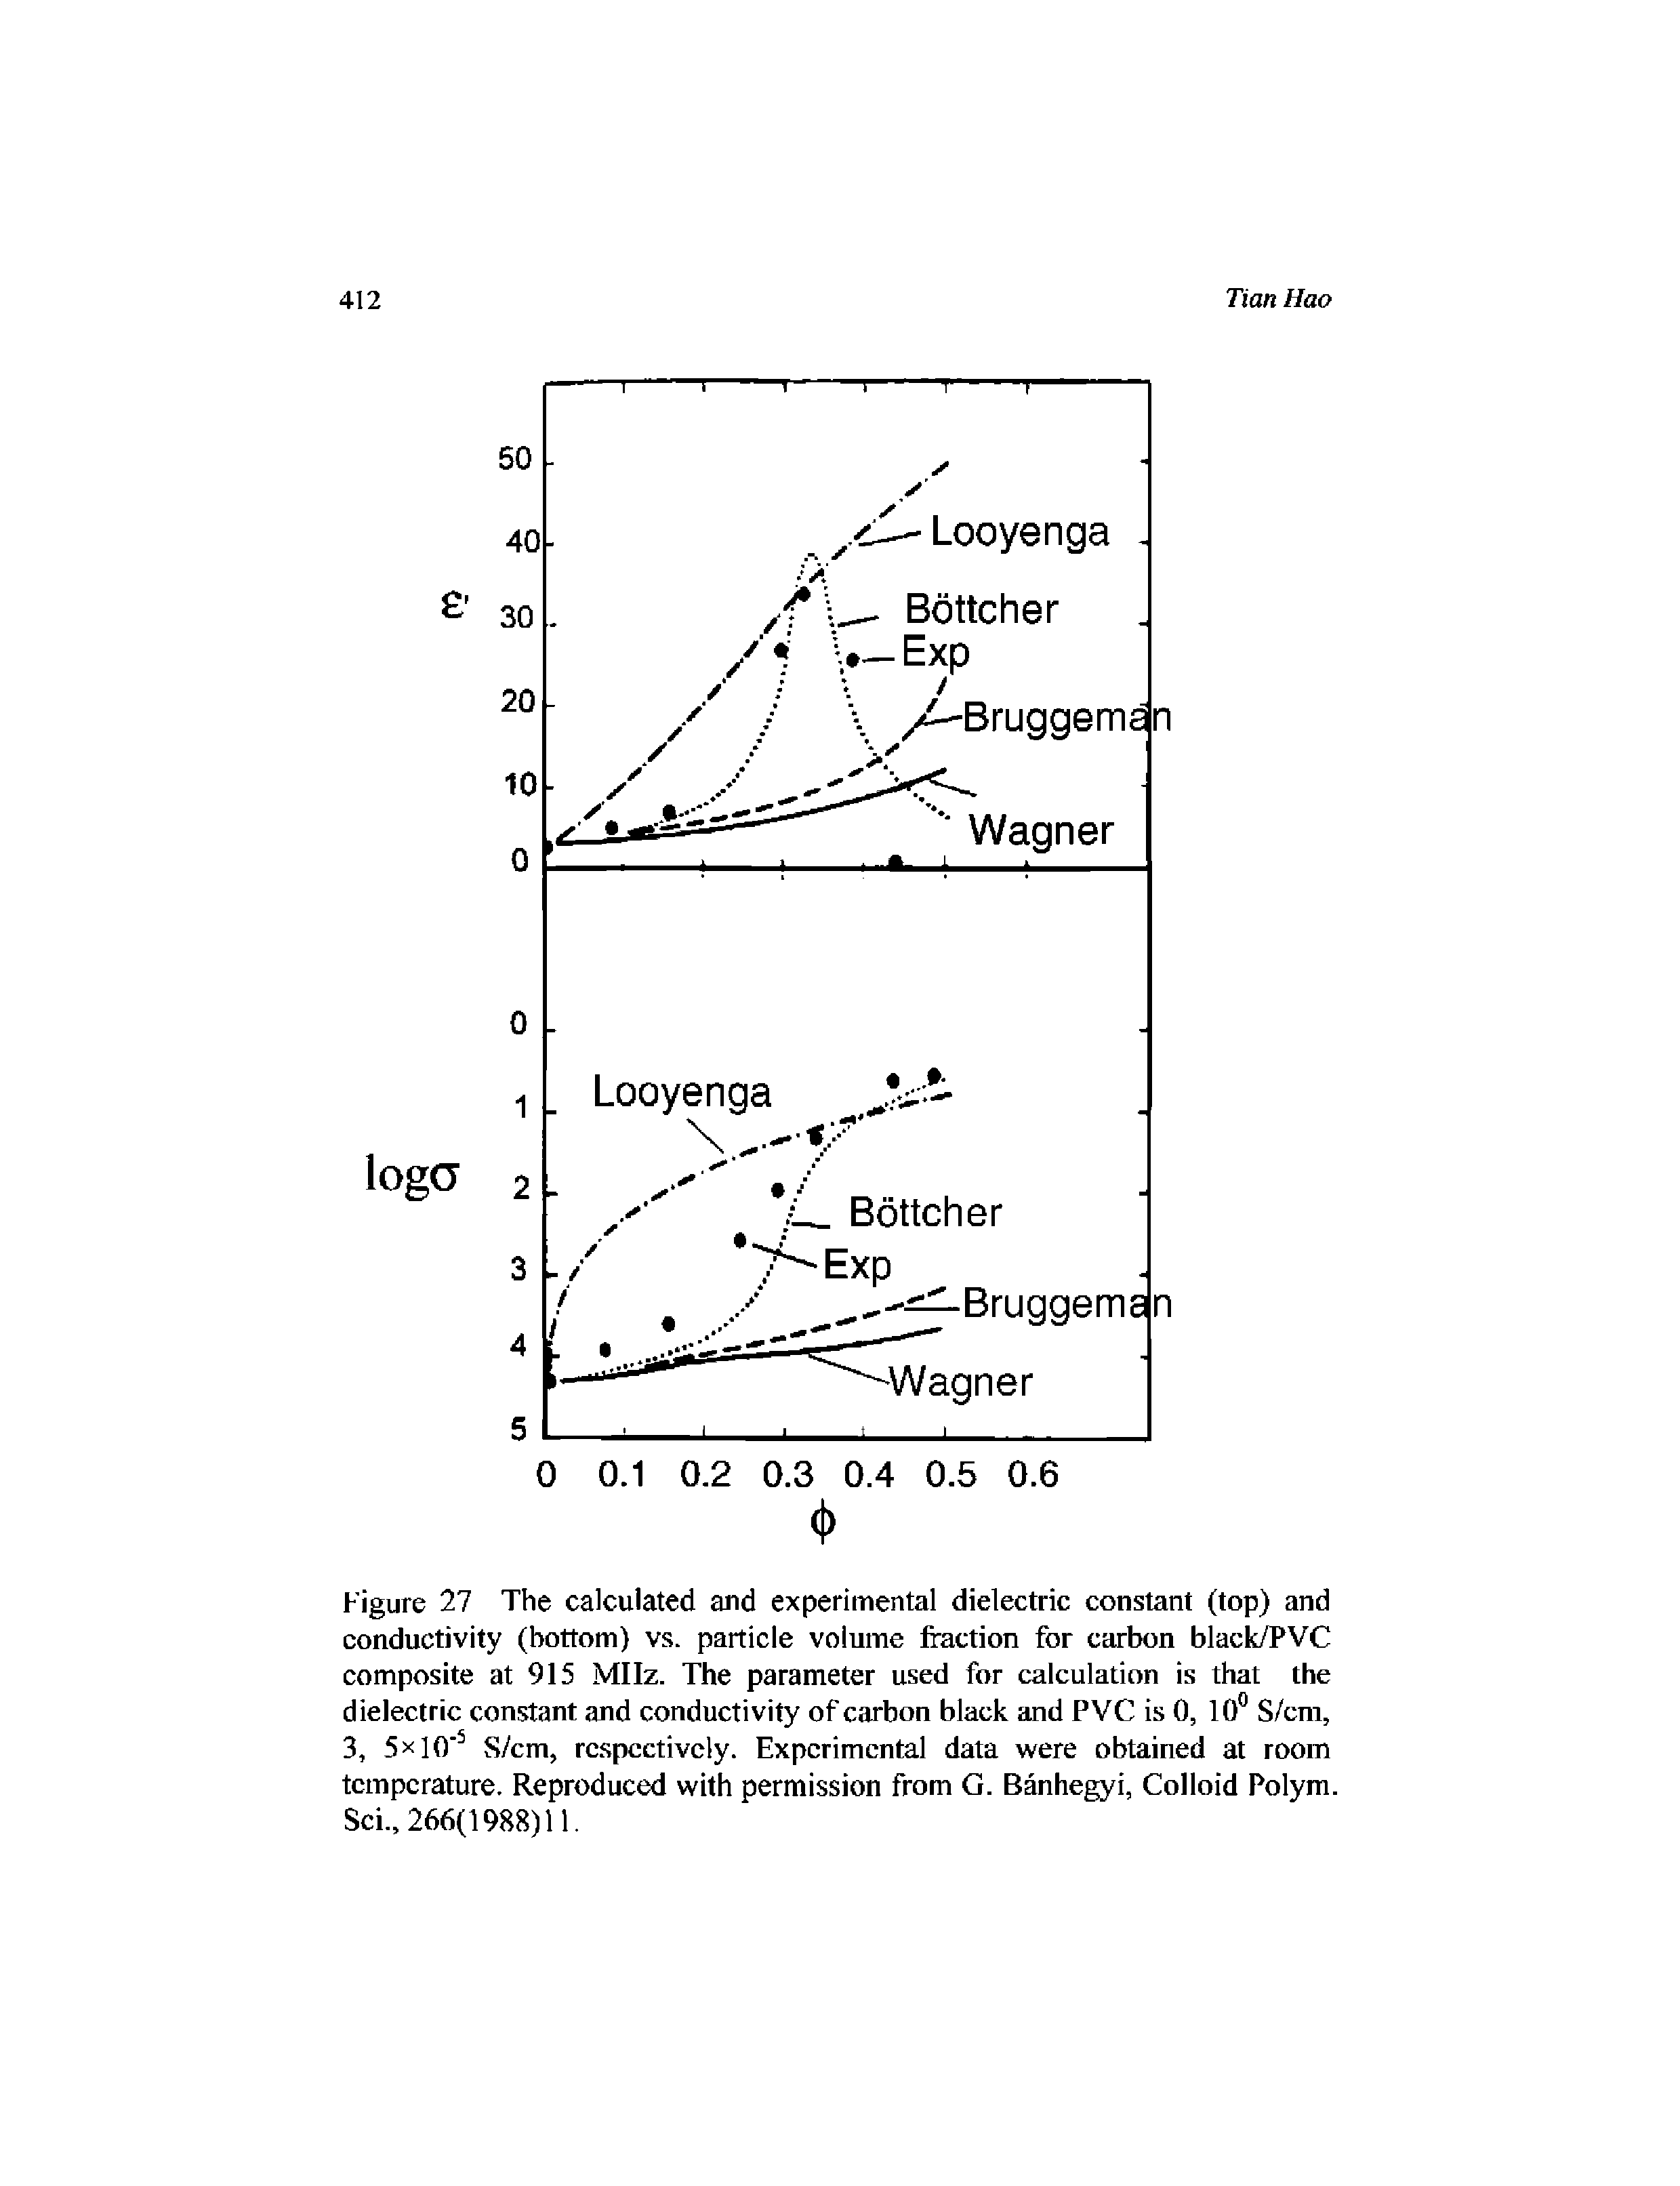 Figure 27 The calculated and experimental dielectric constant (top) and conductivity (bottom) vs. particle volume fraction for carbon black/PVC composite at 915 MIIz. The parameter used for calculation is that the dielectric constant and conductivity of carbon black and PVC is 0, 10 S/cm, 3, 5xl0 S/cm, respectively. Experimental data were obtained at room temperature. Reproduced with permission from G. Banhegyi, Colloid Polym. Sci., 266(1988)11.